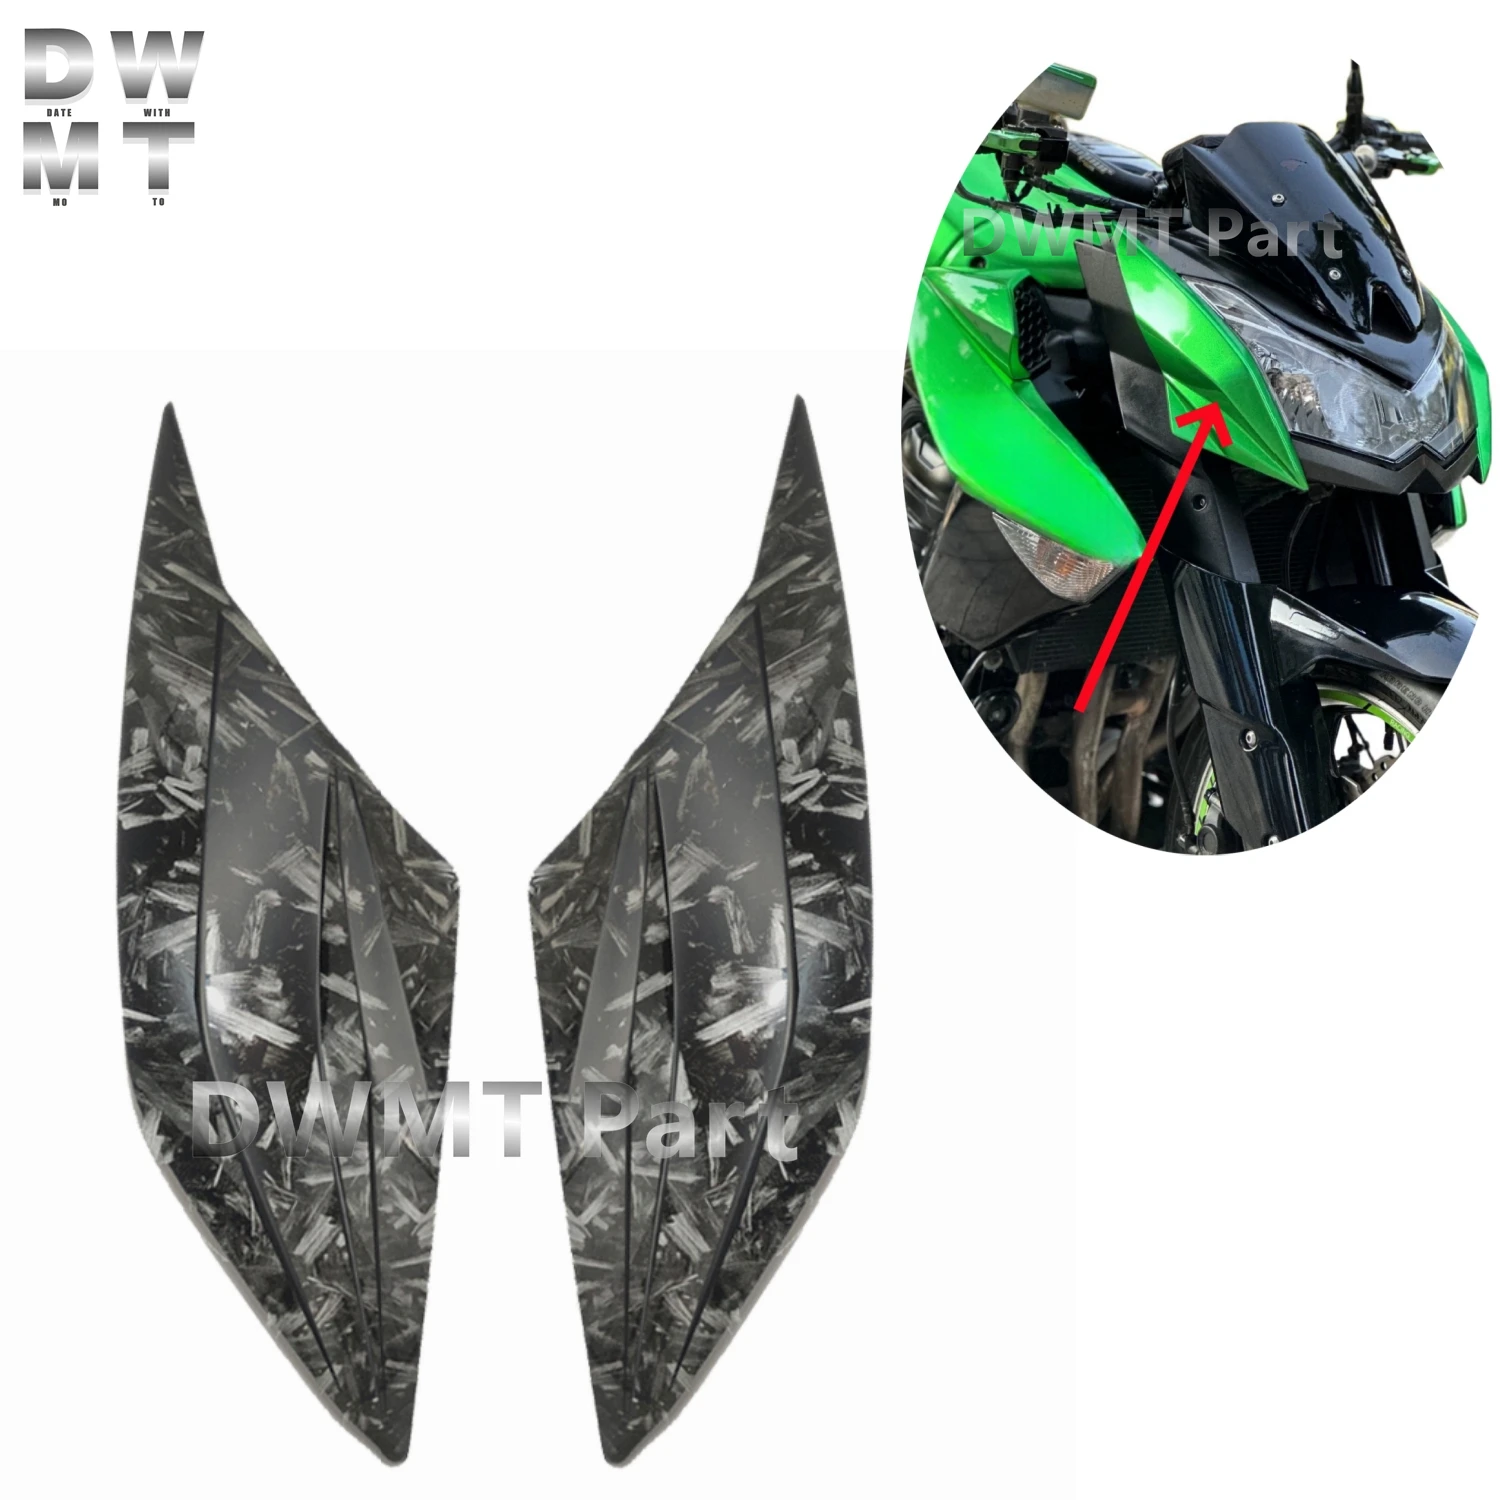 

ABS Plastic Head Fairing for Kawasaki Z1000 2010-2013 Motorcycle Accessories Headlight Side Cover Front Flank Panel Head Cowl